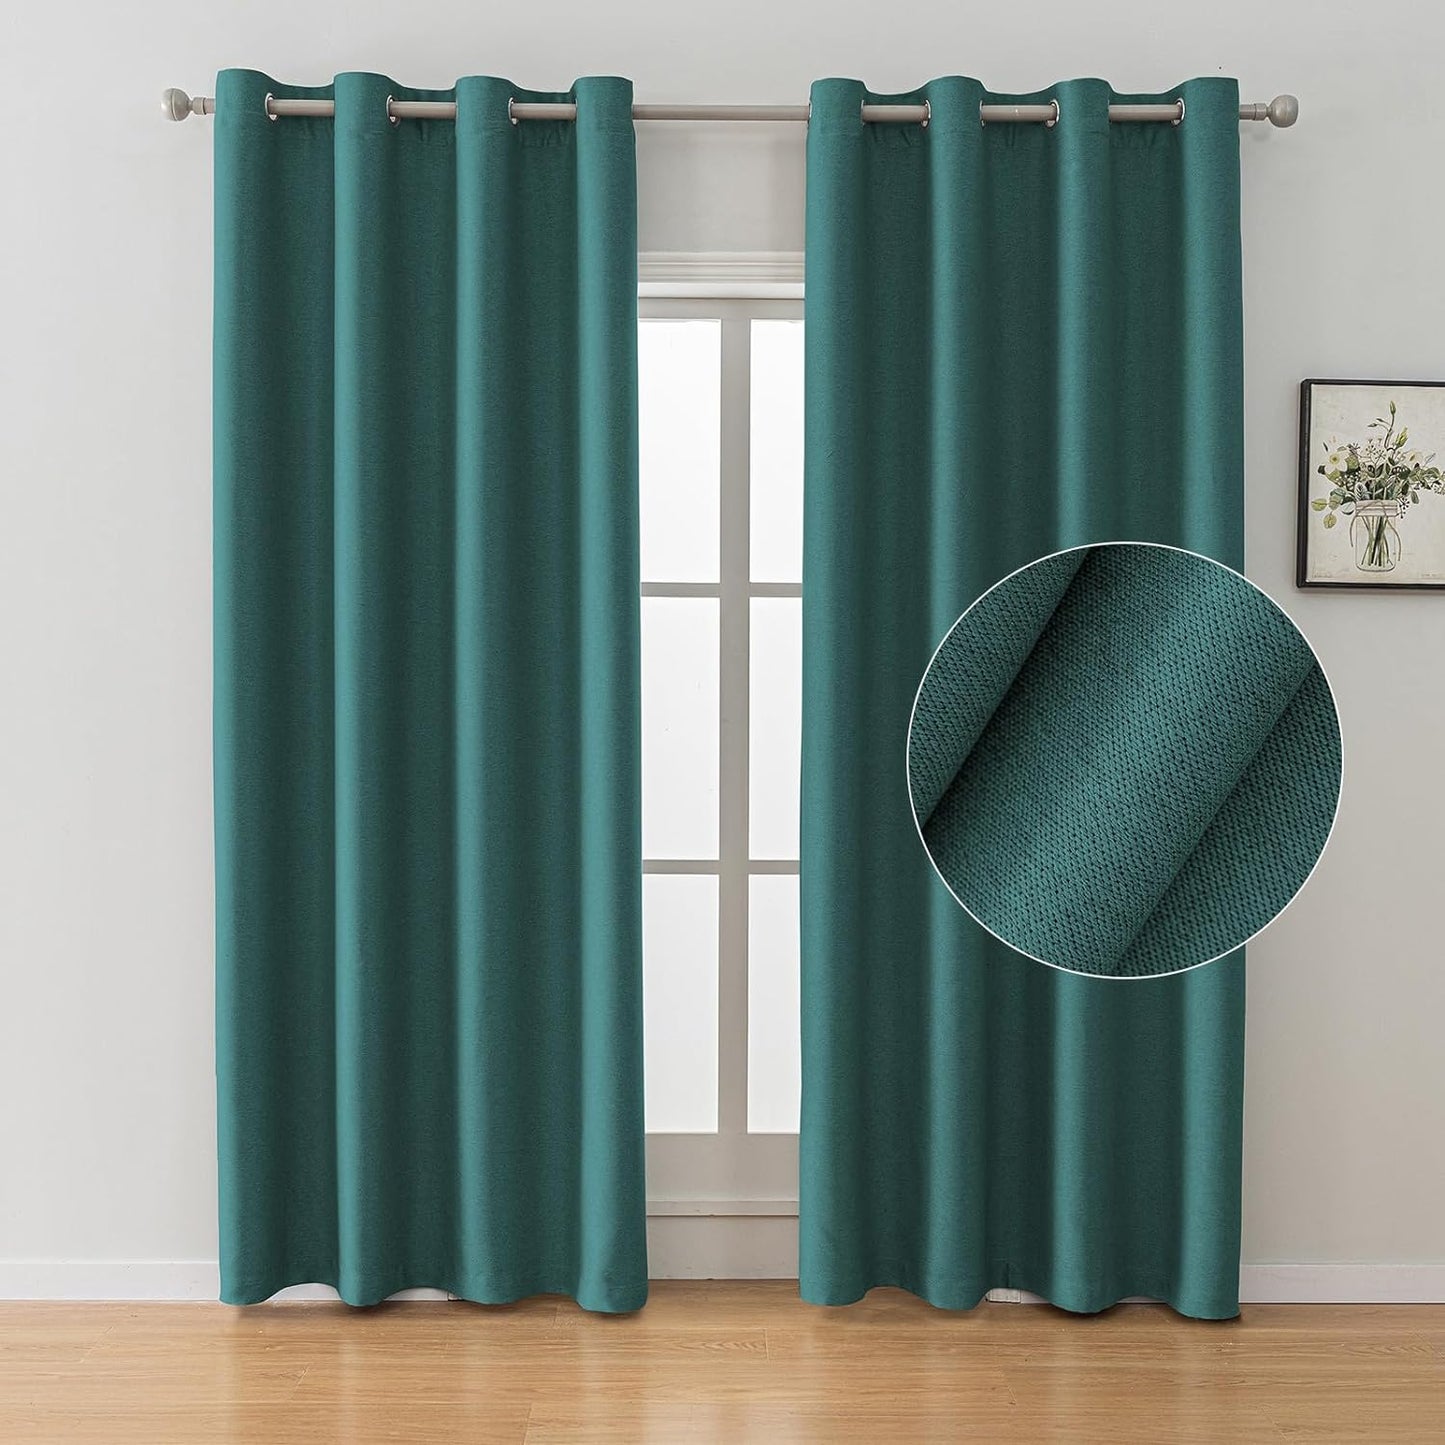 SYSLOON Natural Linen Curtains 72 Inch Length 2 Panels Set,Blackout Curtains for Bedroom Grommet,Thermal Insulated Room Darkening Curtains for Living Room,Long Drapes 42"X72",Beige  SYSLOON Green 52X96In （W X L） 